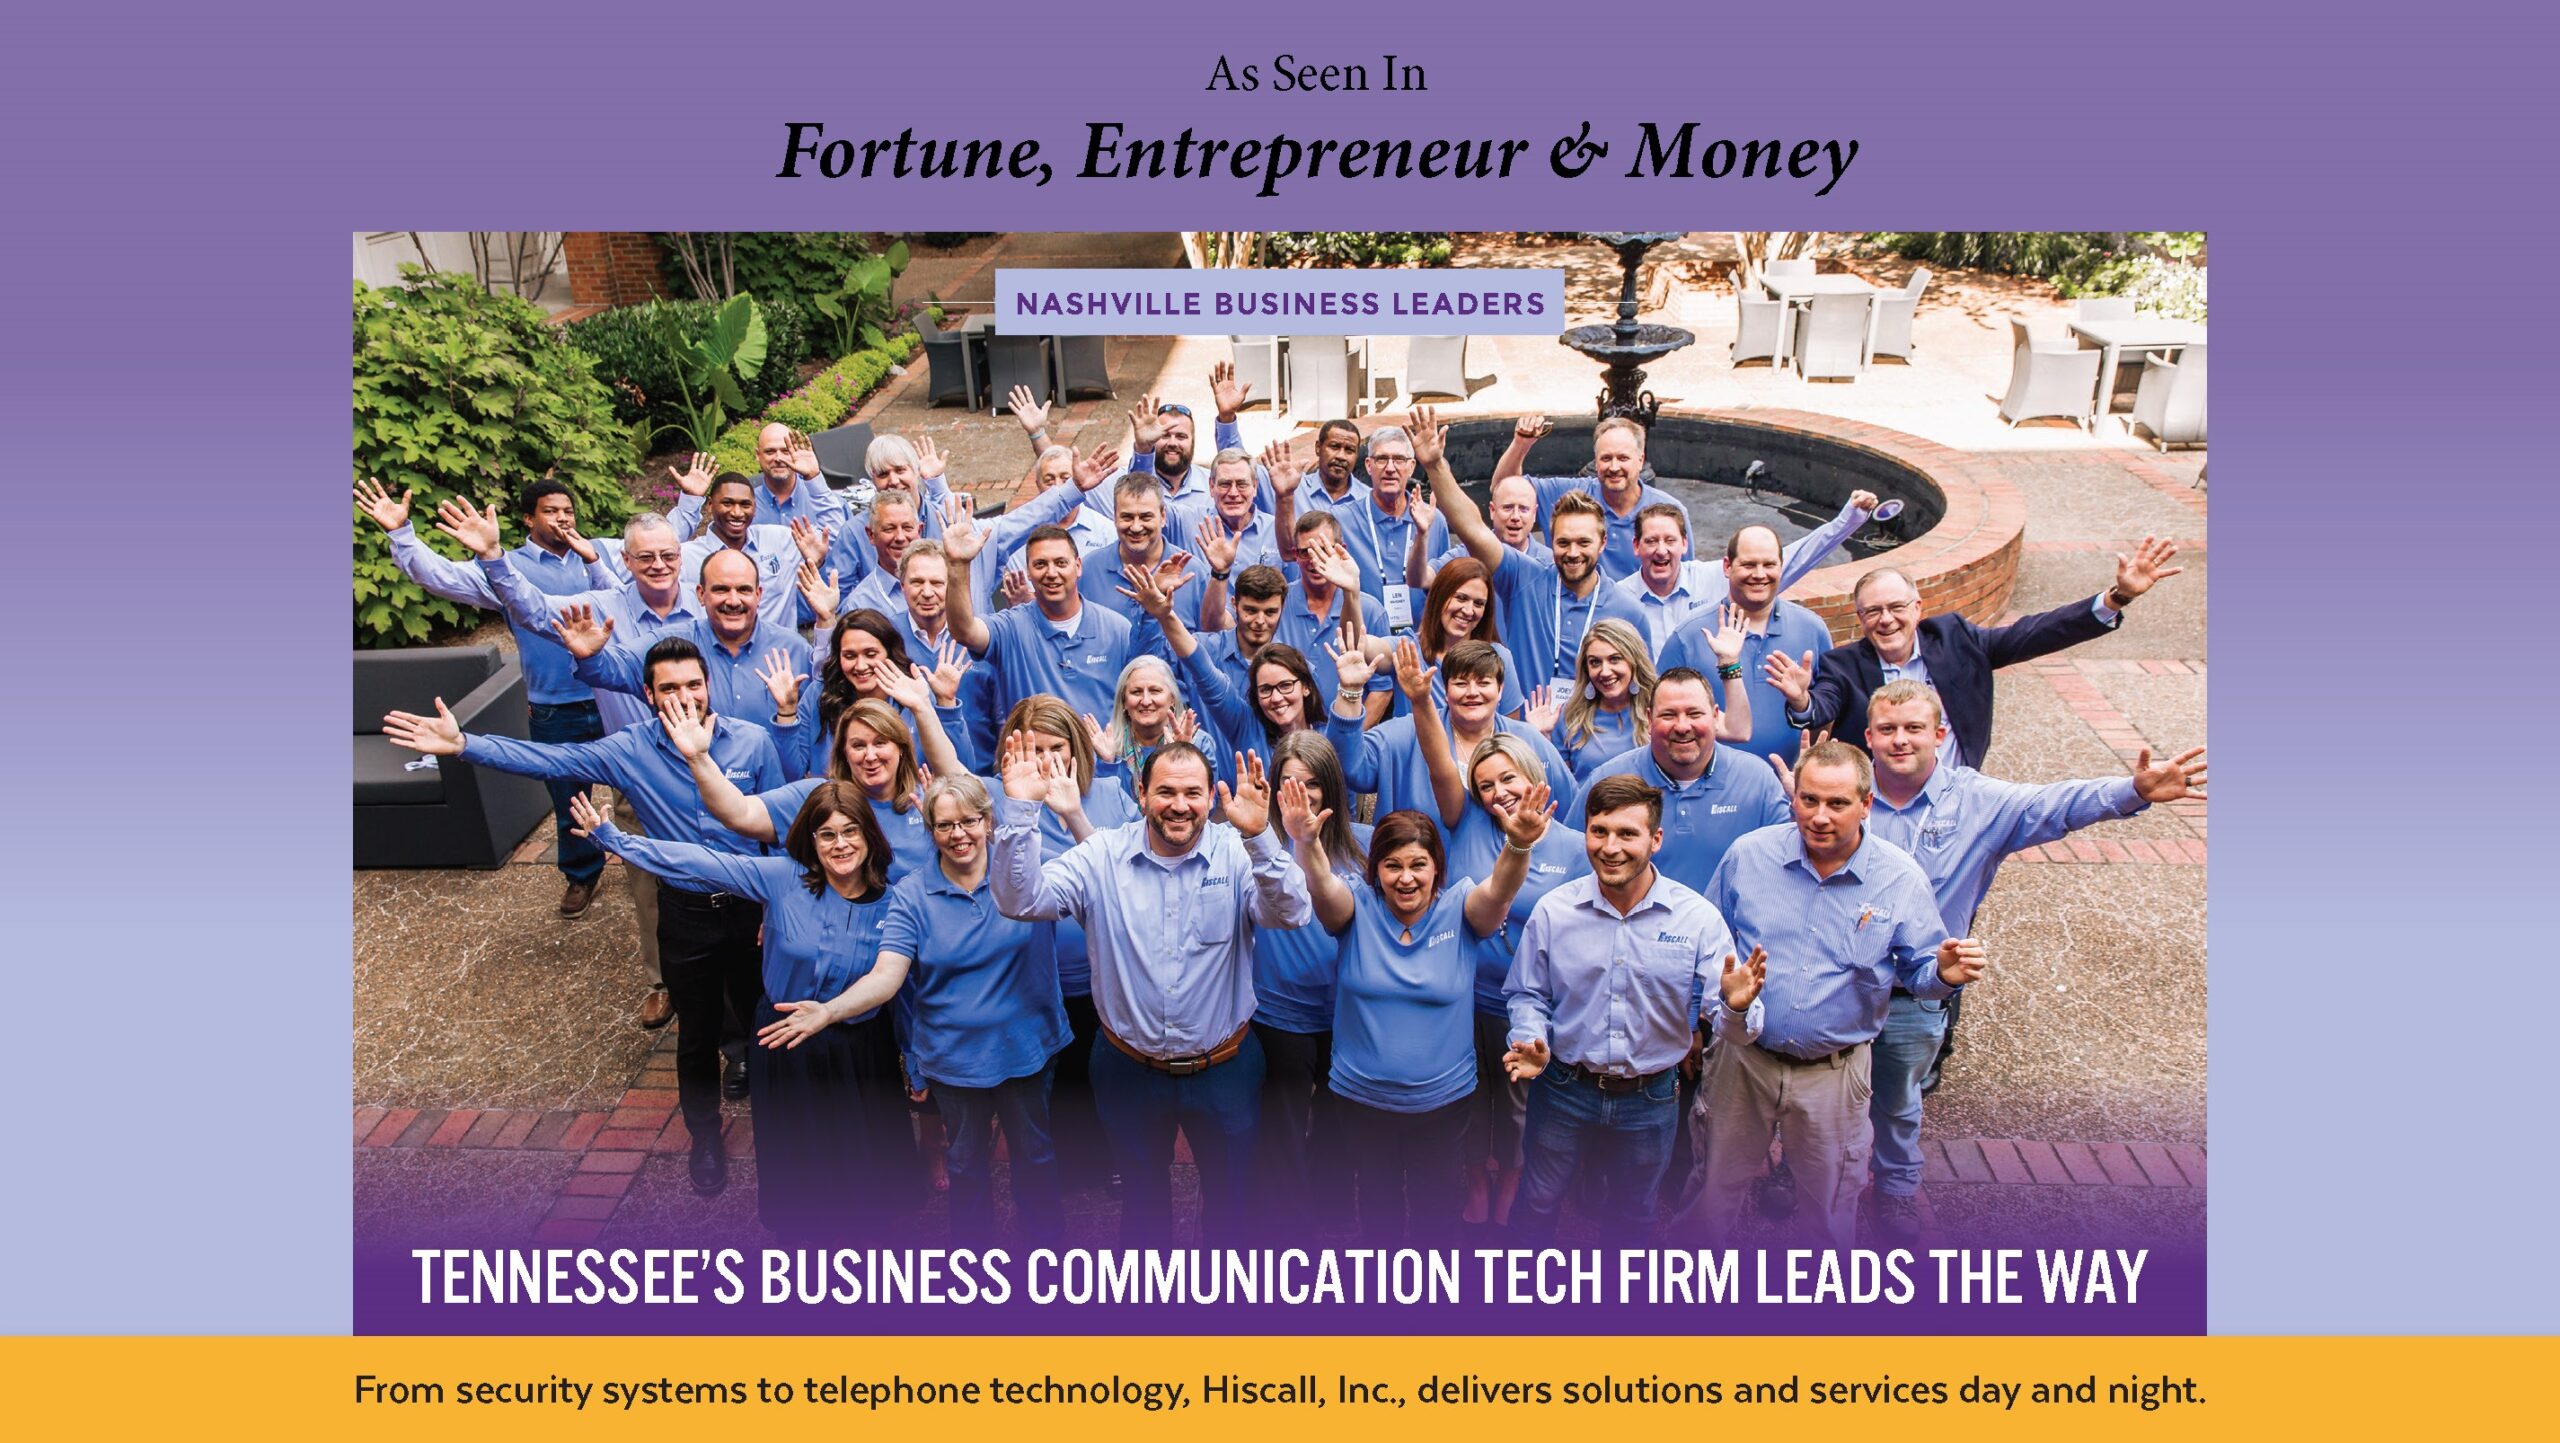 Tennessee’s Business Communication Tech Firm Leads The Way – January 2018